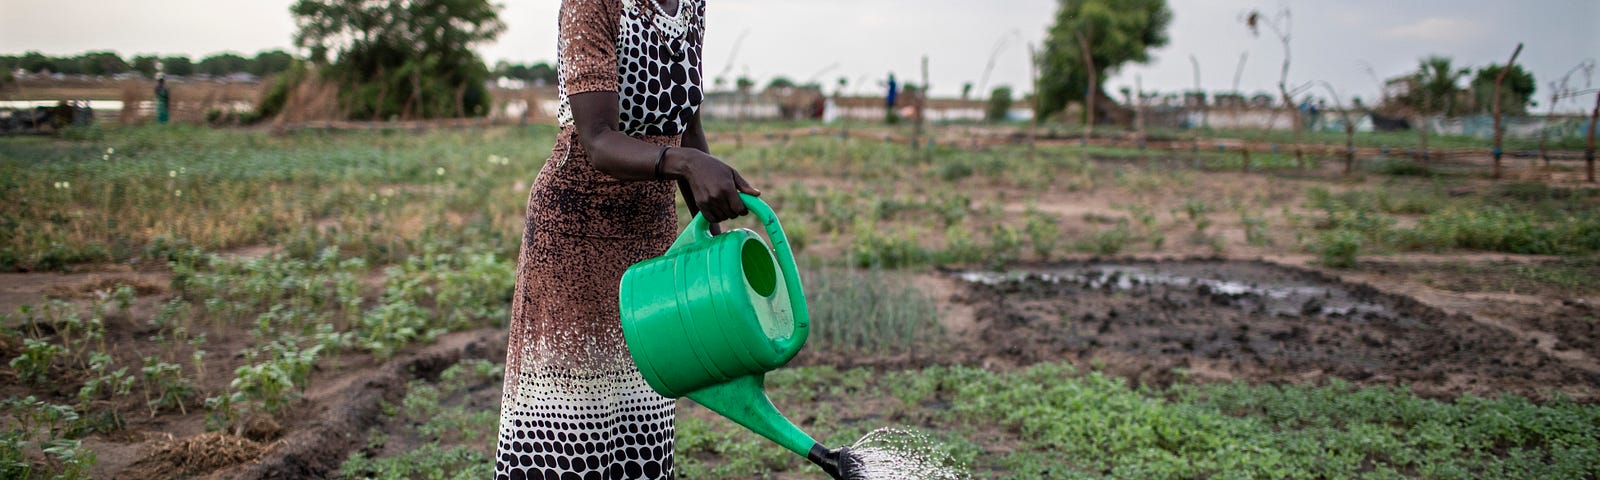 A woman waters vegetables on the farm of a vegetable producer group in Malou village, Bor county, Jonglei State, South Sudan. Photo by Will Baxter, Catholic Relief Services